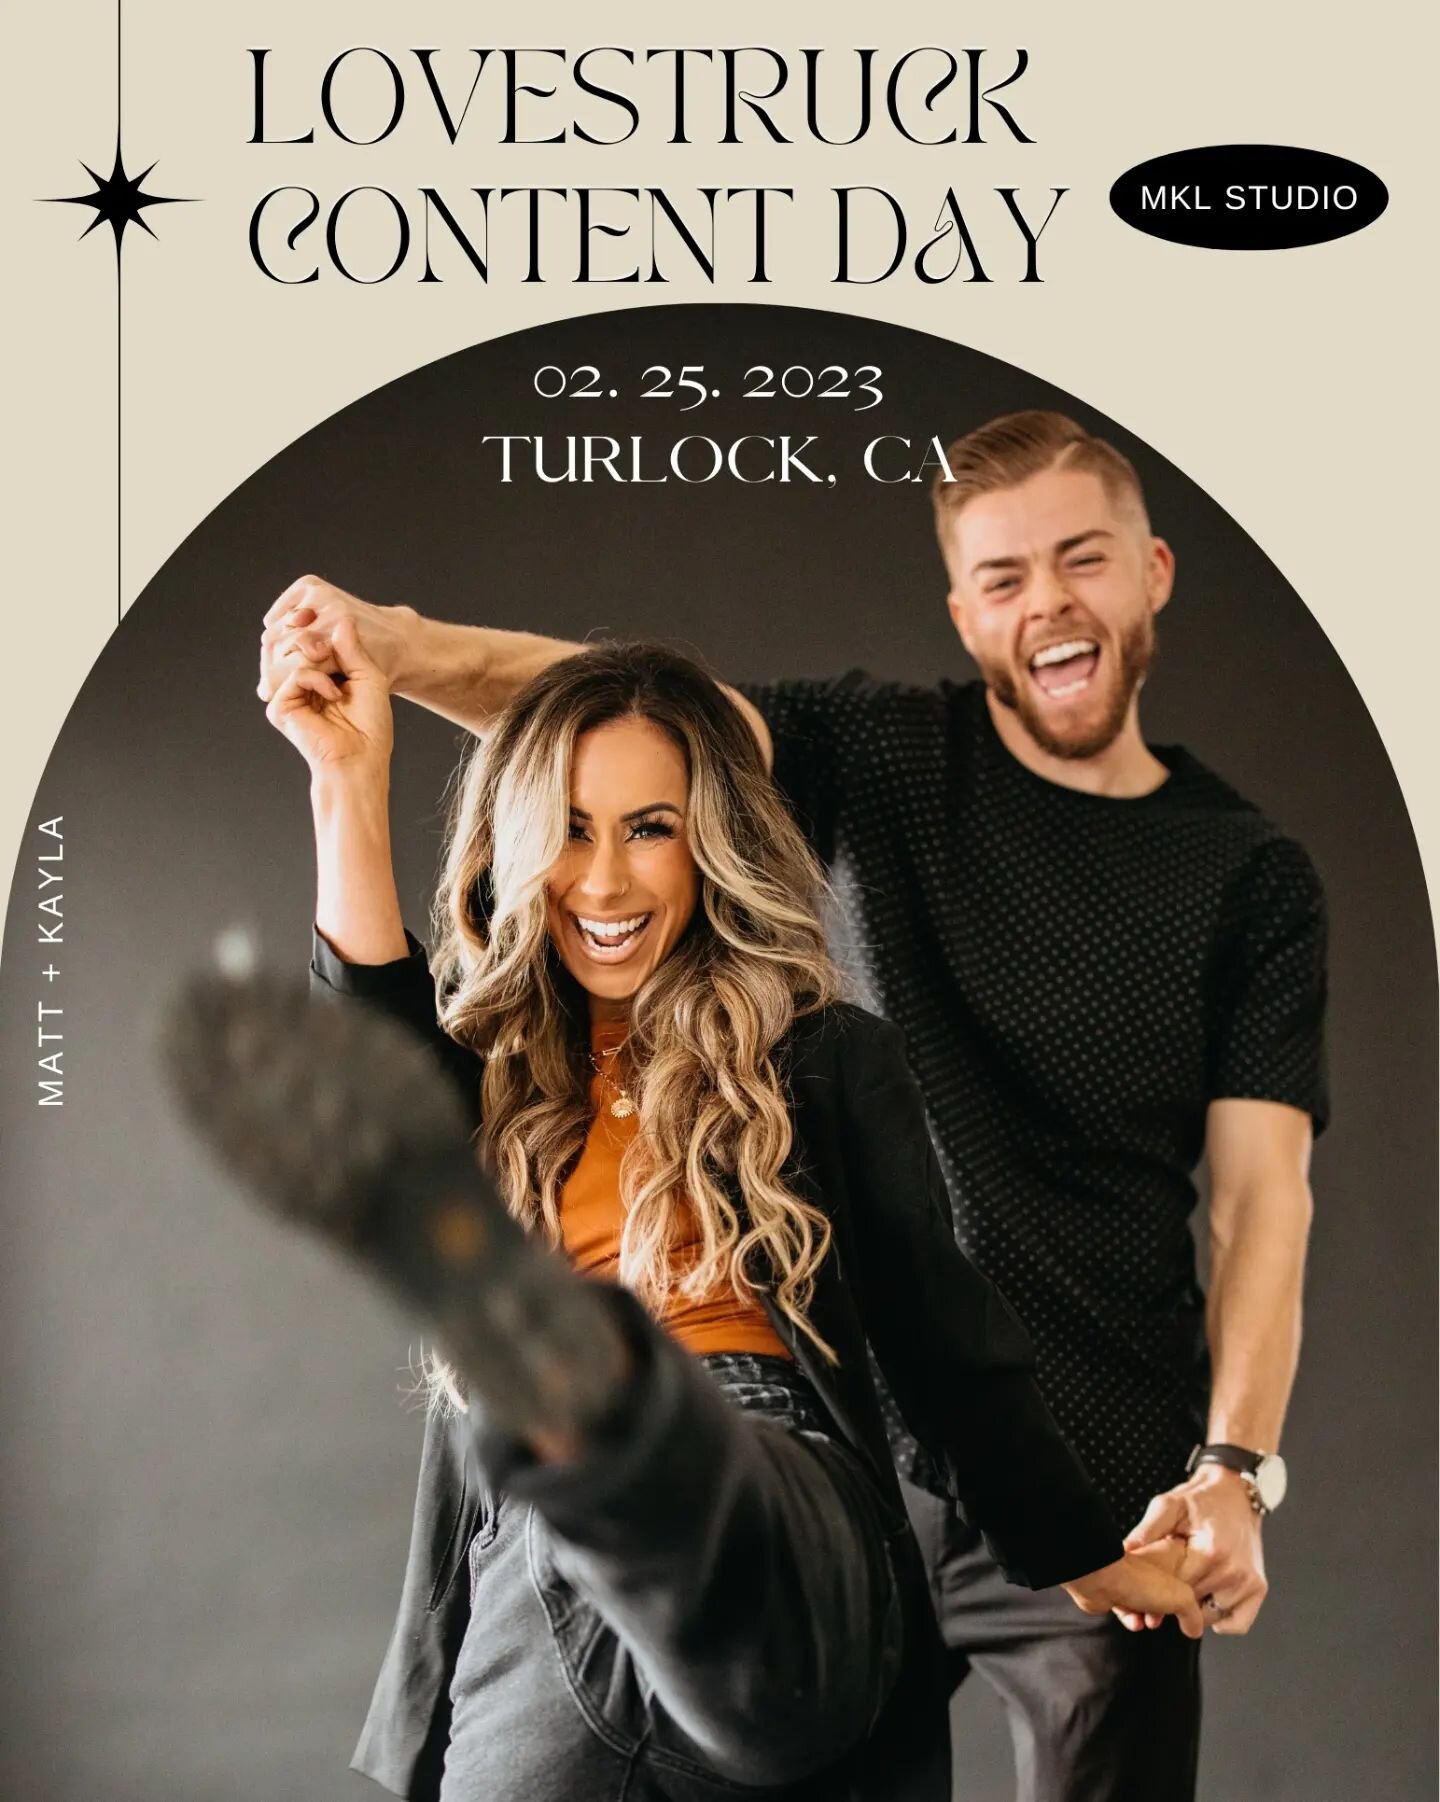 L O V E  S T R U C K 
content day 02. 25. 23 

Tickets are live! Kayla &amp; I are so excited and honored to launch our first content day in our very own studio! 
Only 8 photographer/videographers will have the chance to come capture, create, and lea